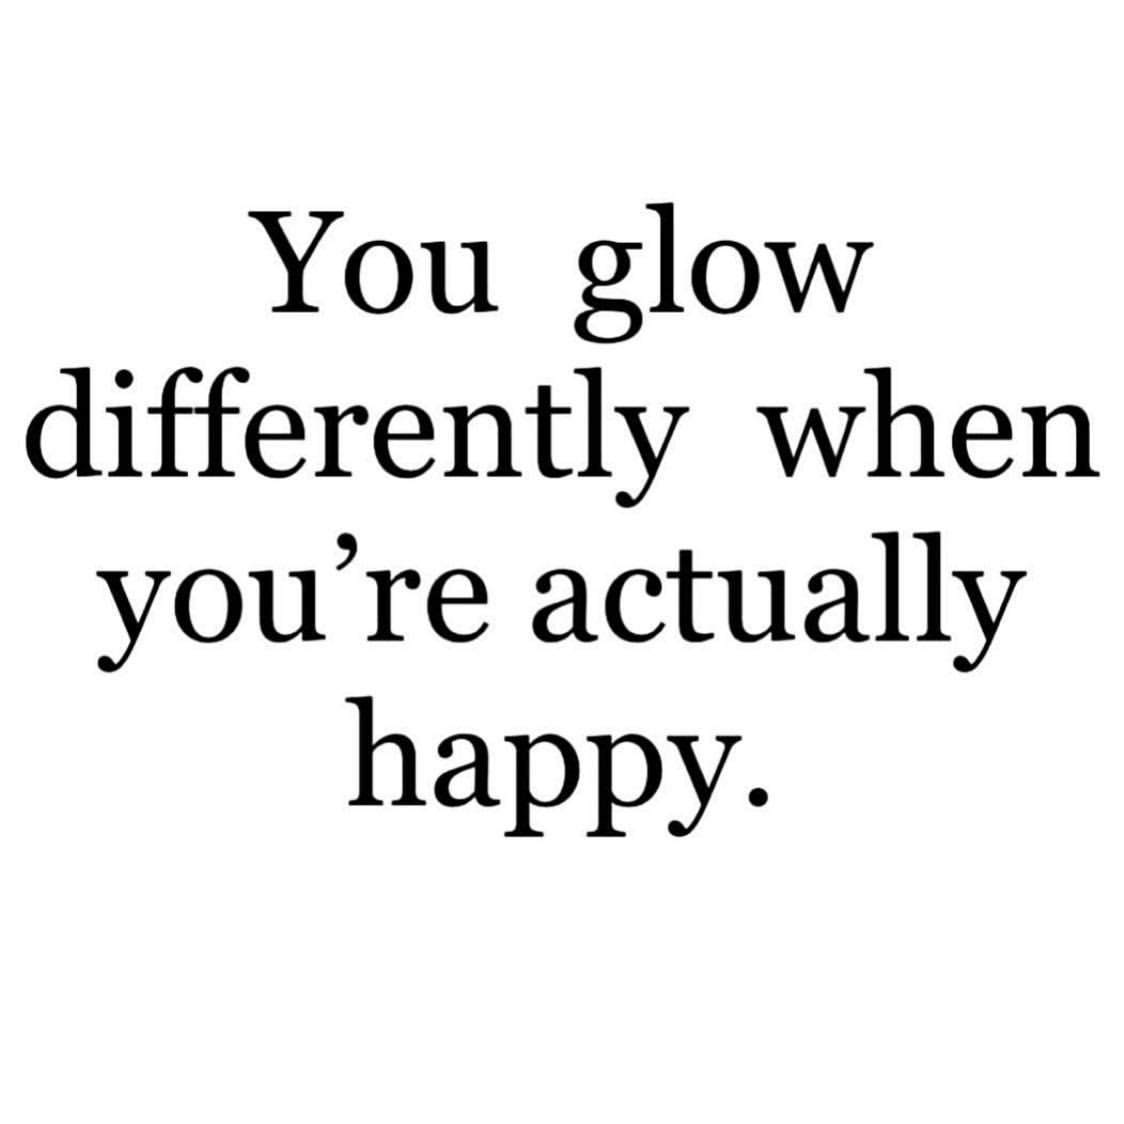 You glow differently when you're actually happy. - Phrases